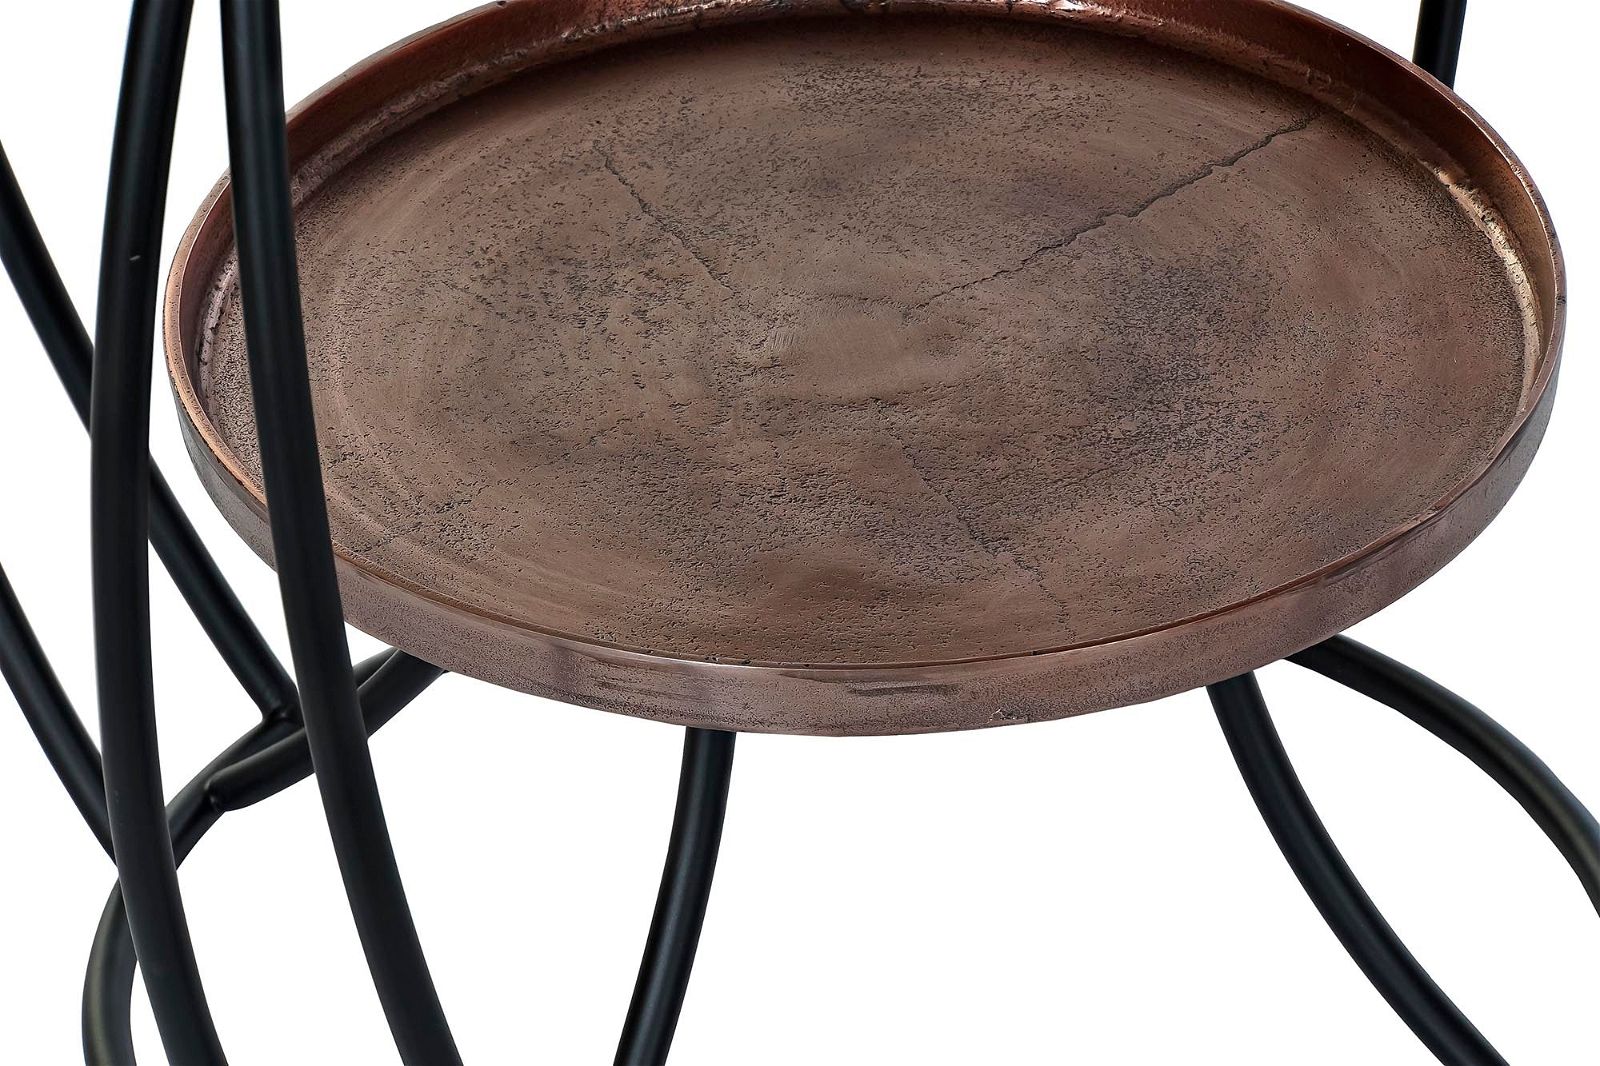 DKD Home Decor Round Coffee Table with wow factor! - vivahabitat.com